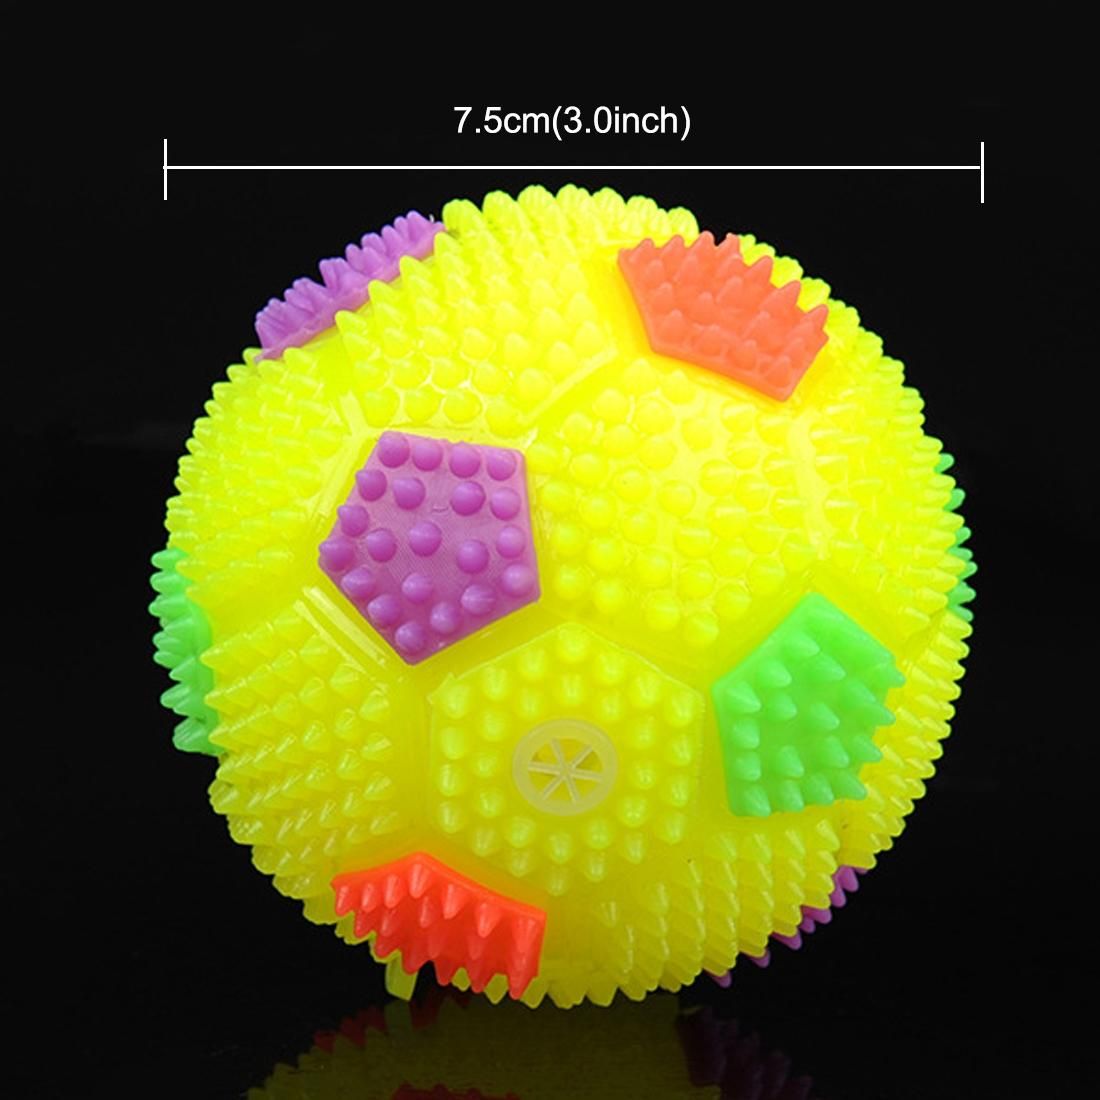 Dog Toy Balls for Pets Color Pet Flashing Ball Glowing Elastic Ball Dog Toy Ball Rubber Acoustic Mimo Bite Toys , Large Size,Random Color Shape Delivery